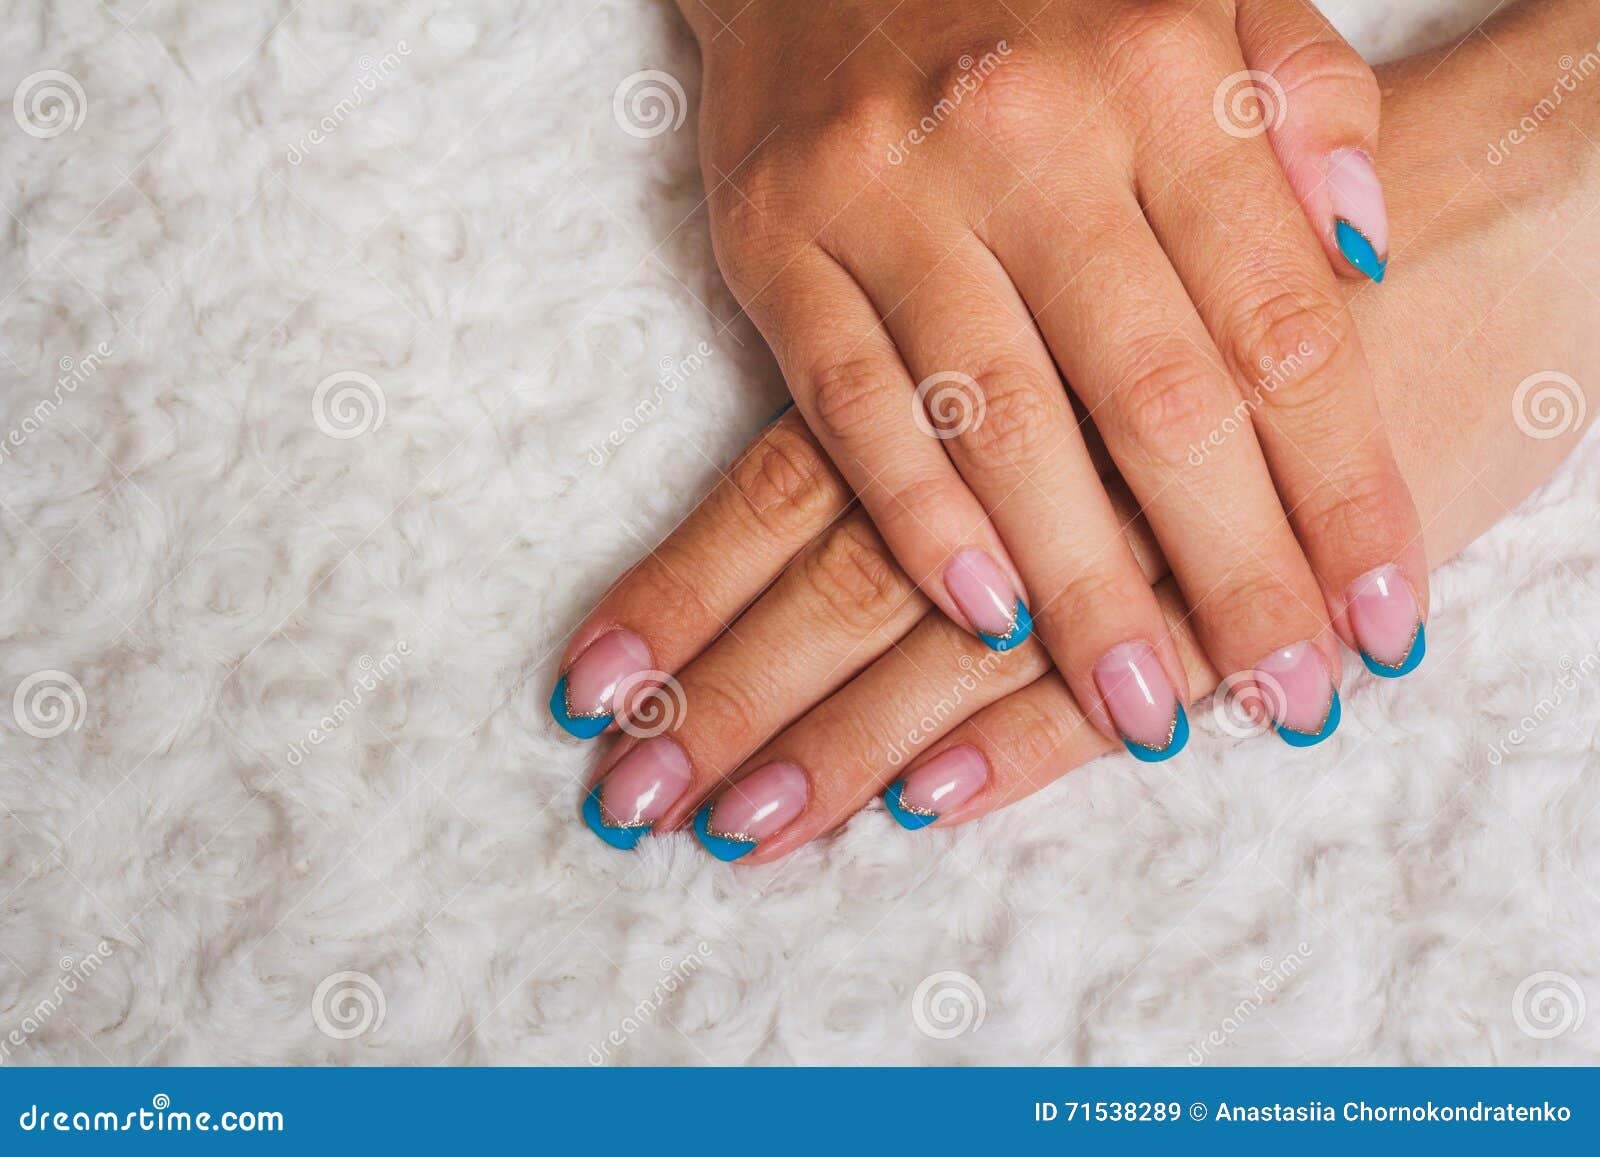 Women`s hand with pale pink gel polish and black fragments on nails.  Women's manicure with pink lacquer and black abstract design. Quail egg  design Stock Photo | Adobe Stock